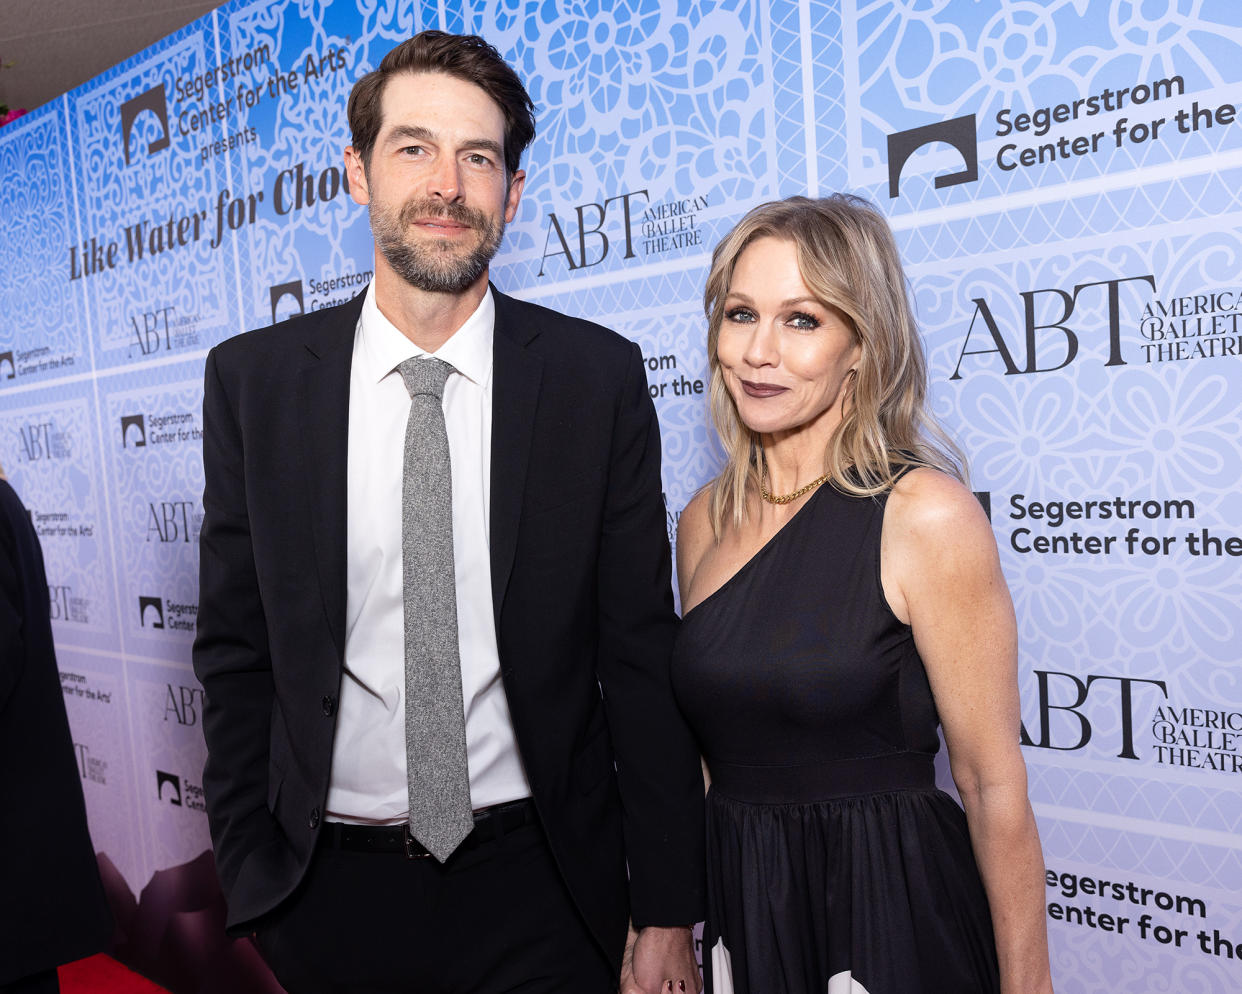 Jennie Garth's Husband Dave Abrams Says He ‘Slept in the Guest Room’ When Her Kids Were Home